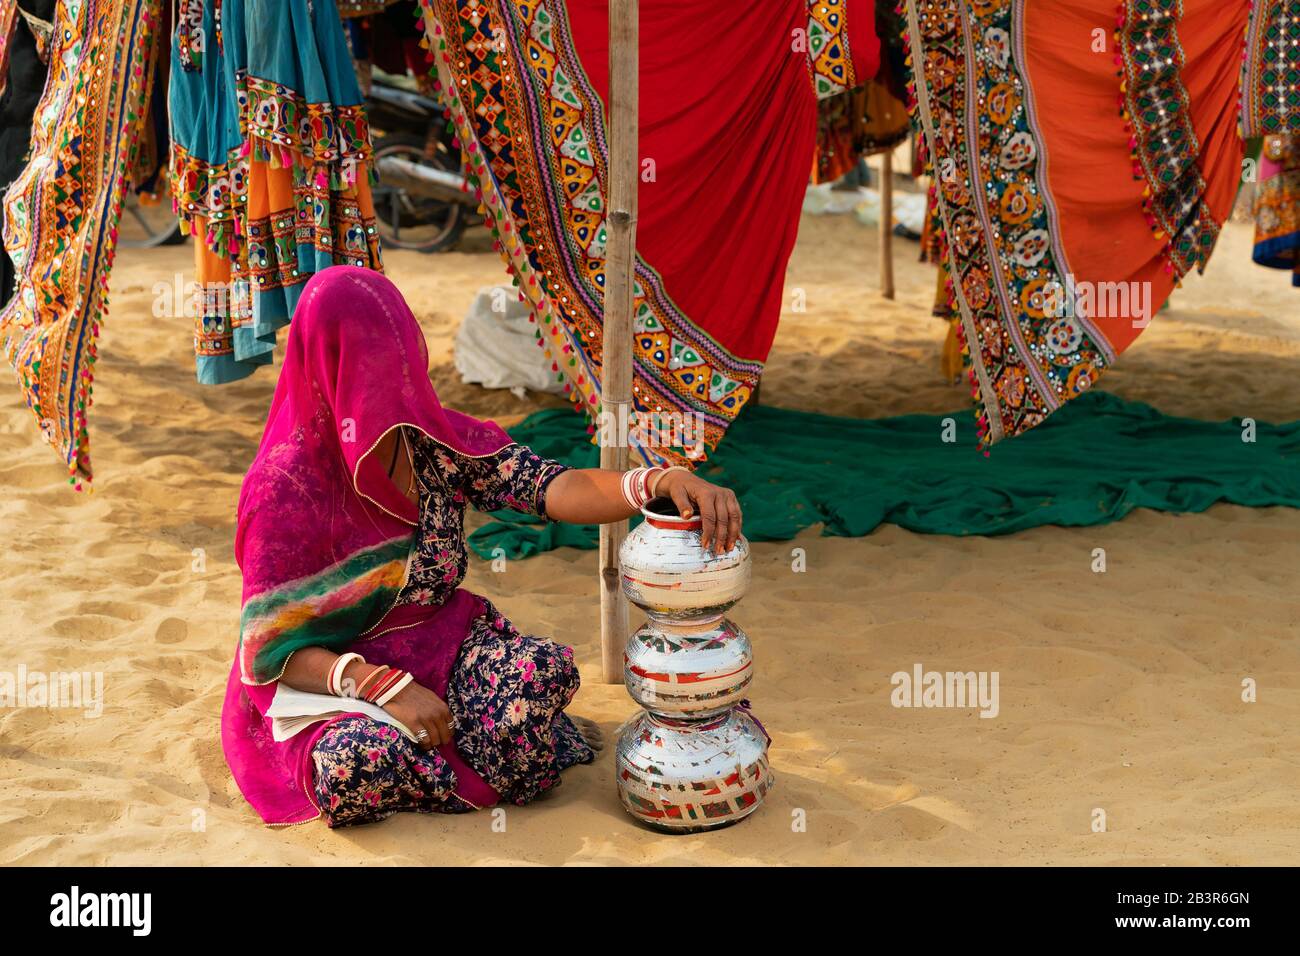 Woman under veil and with traditional clothes selling colorful skirts in desert near Pushkar, Rajasthan, India. Stock Photo